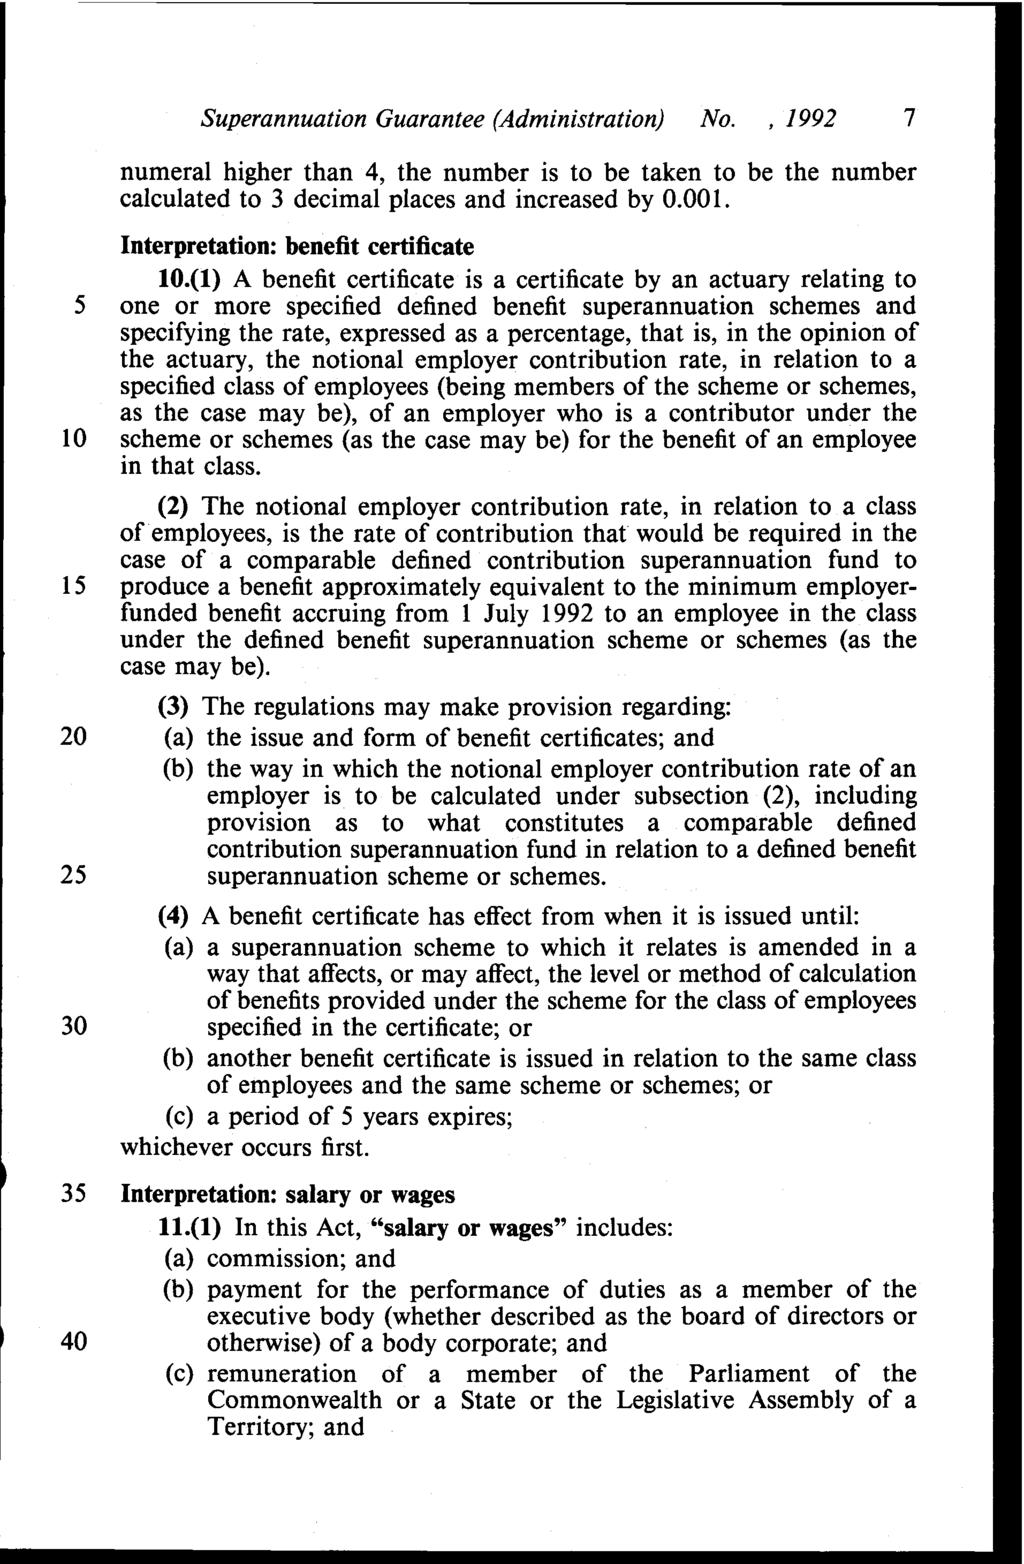 Superannuation Guarantee (Administration) No., 1992 7 numeral higher than 4, the number is to be taken to be the number calculated to 3 decimal places and increased by 0.001.